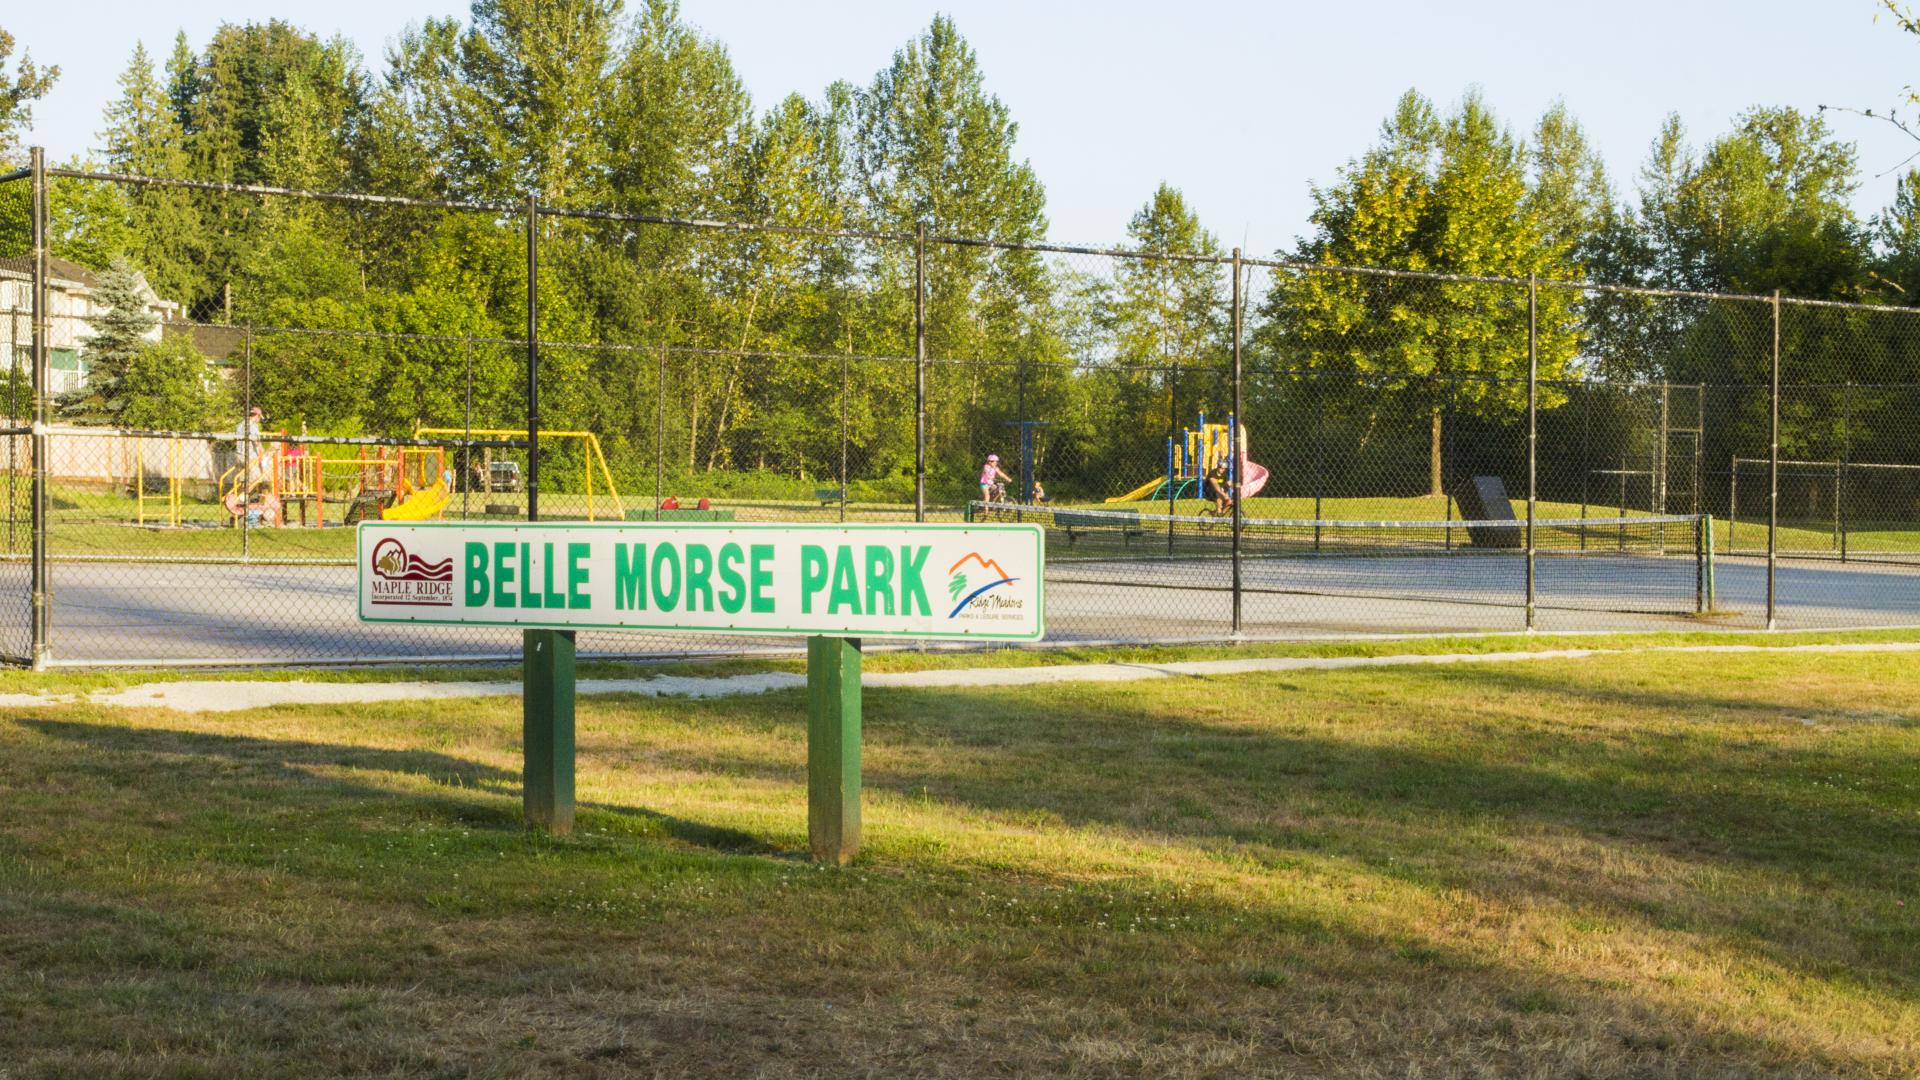 The Belle Morse Park sign sits on a patch of grass near the basketball court.